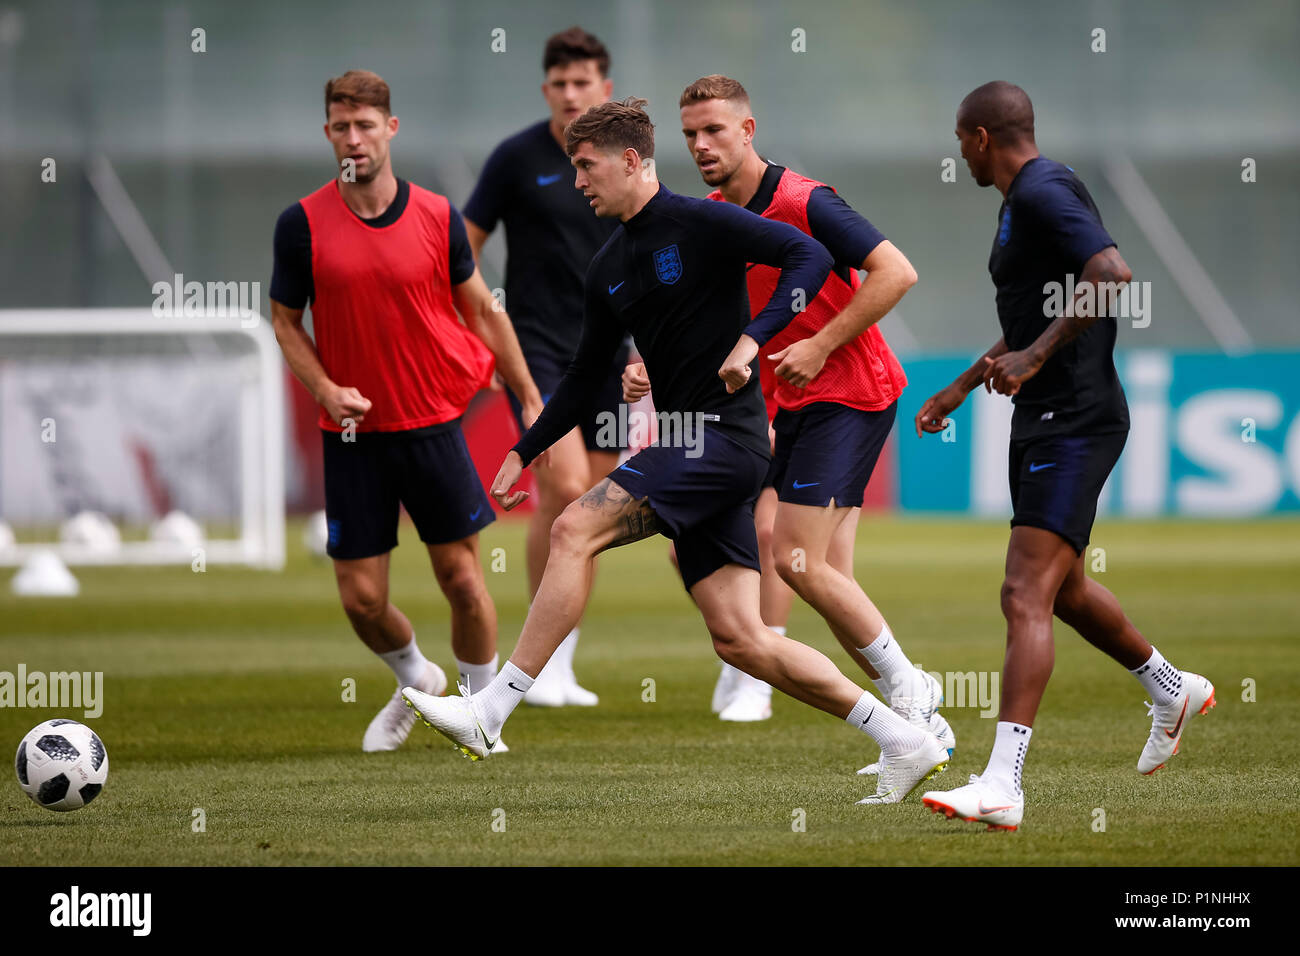 St Petersburg, Russia, 13th June 2018. John Stones of England during an England training session at Stadium Spartak Zelenogorsk on June 13th 2018 in Zelenogorsk, Saint Petersburg, Russia. (Photo by Daniel Chesterton/phcimages.com) Credit: PHC Images/Alamy Live News Stock Photo